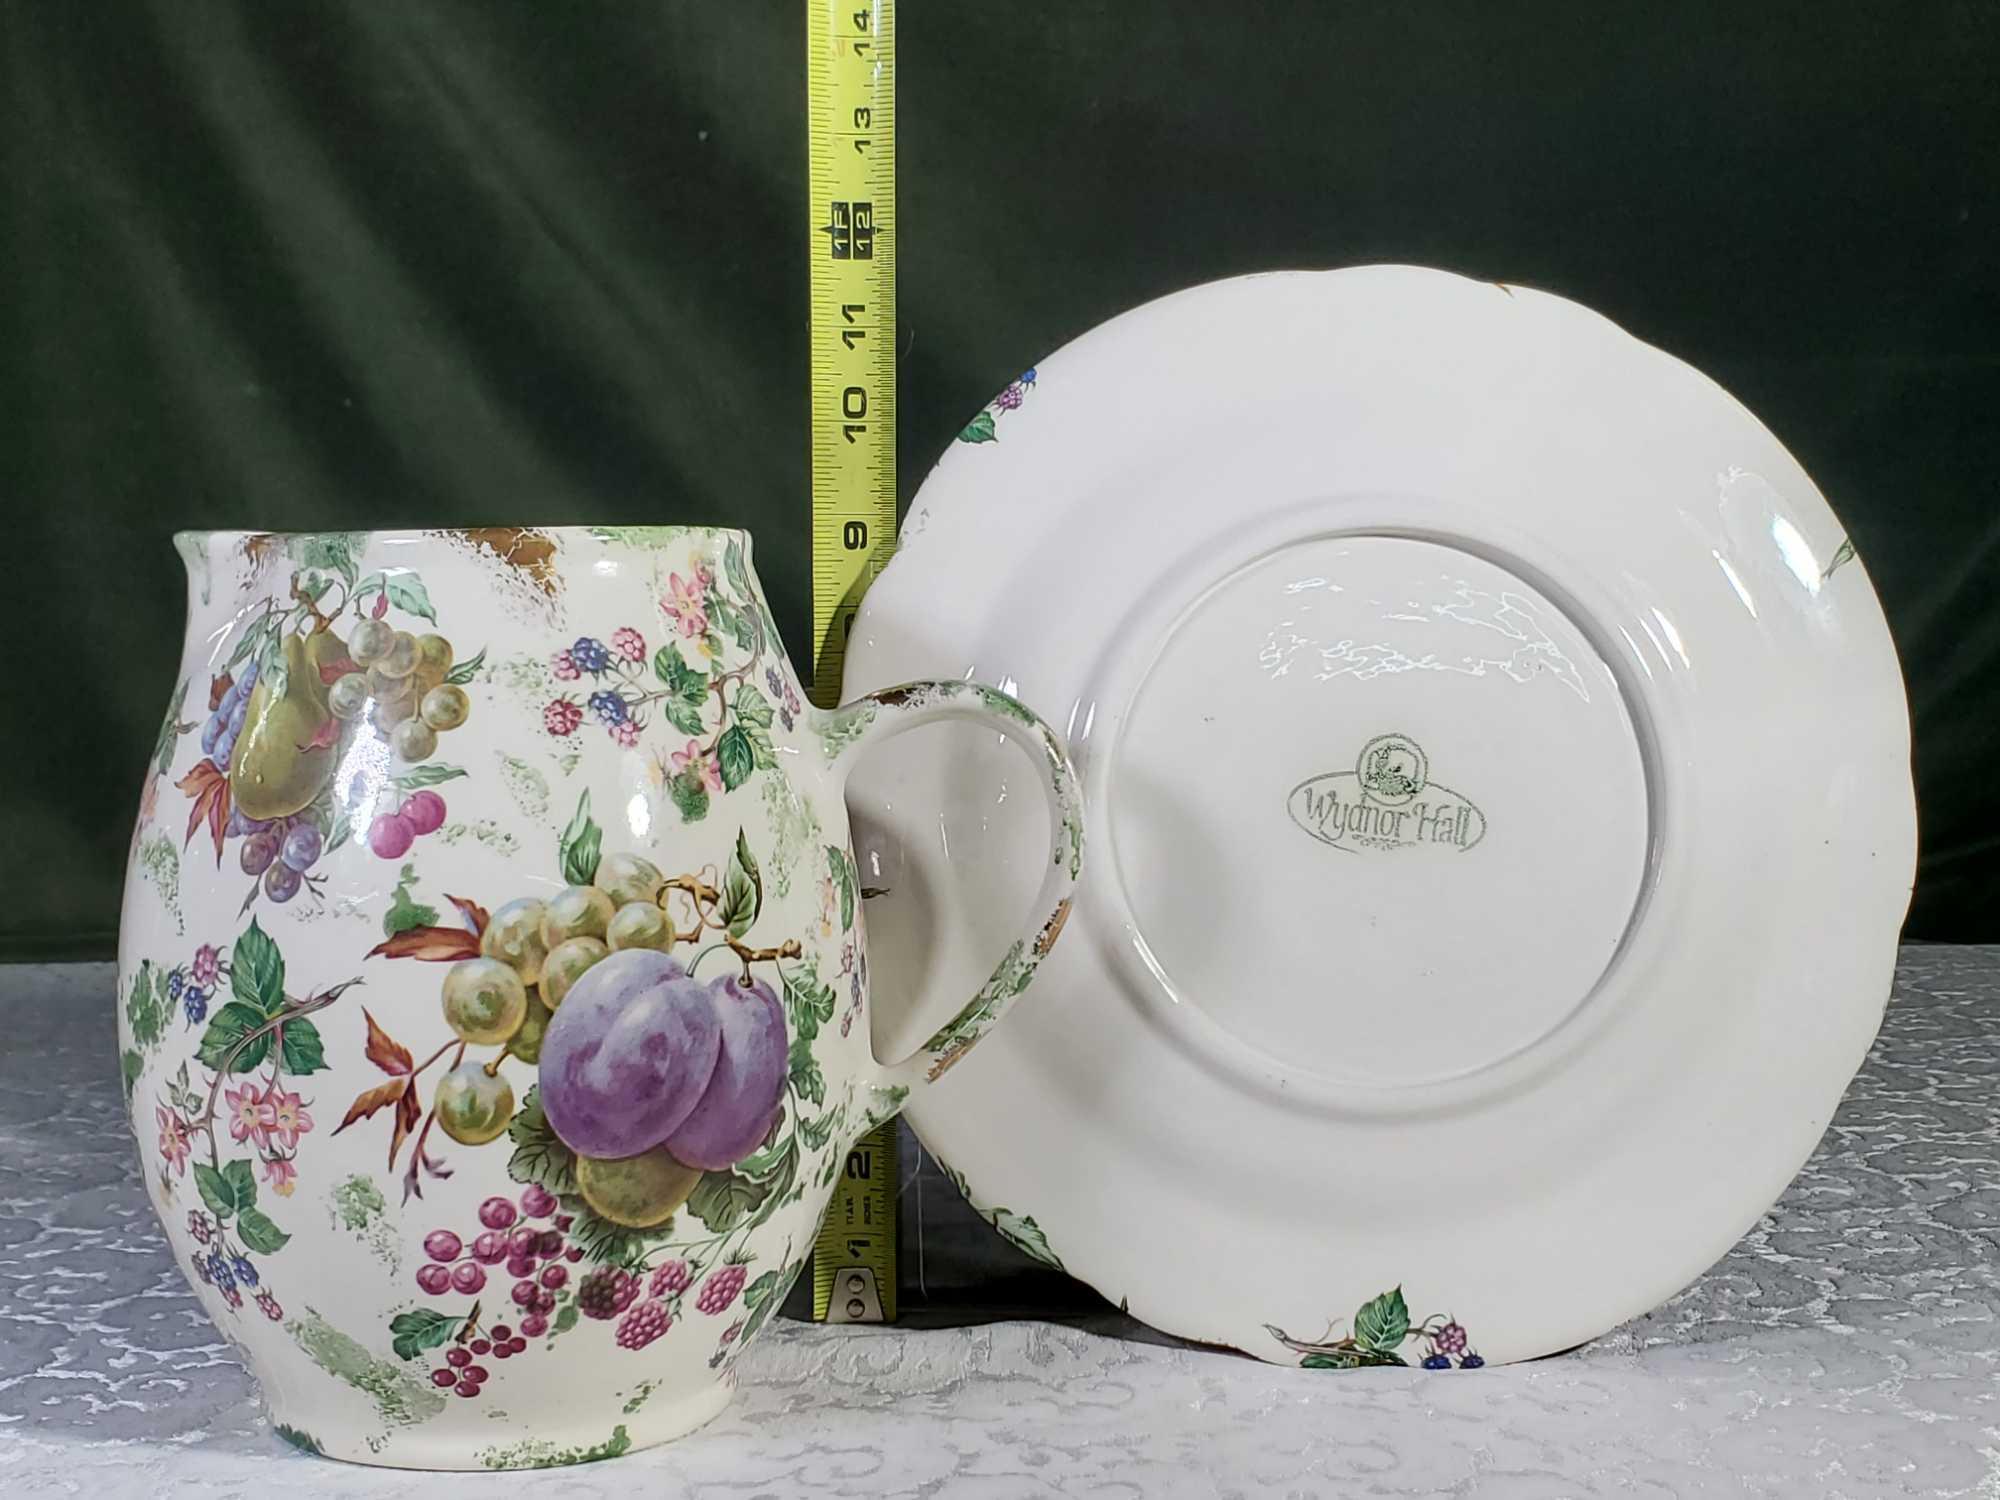 6 Pcs Decorated Porcelain Table and Kitchenware Accents